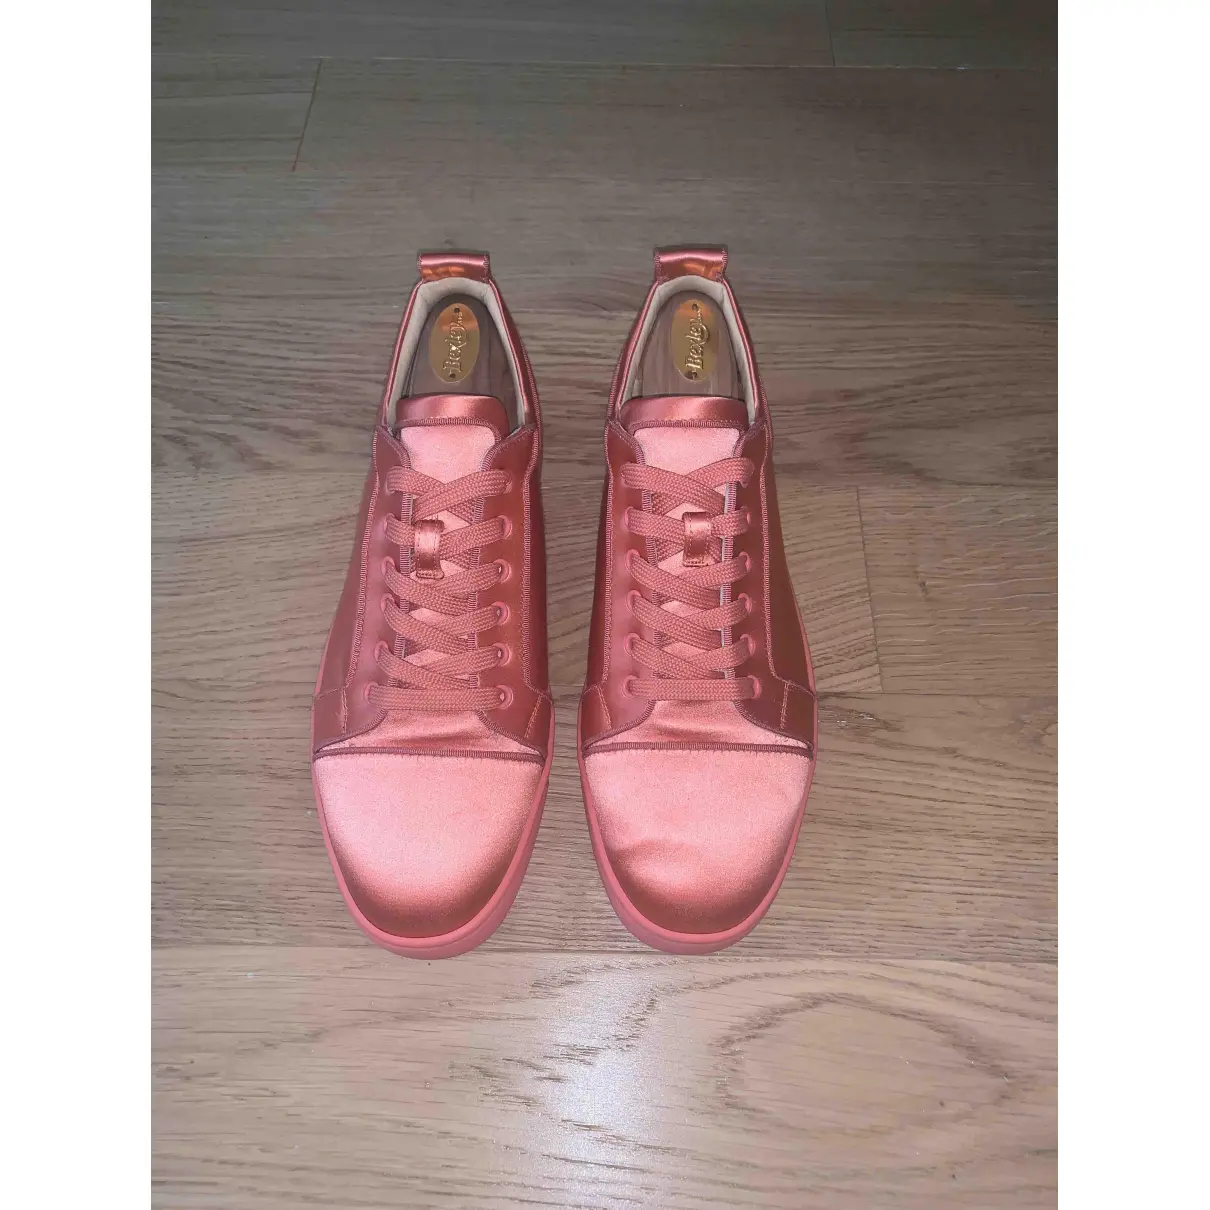 Buy Christian Louboutin Louis cloth low trainers online